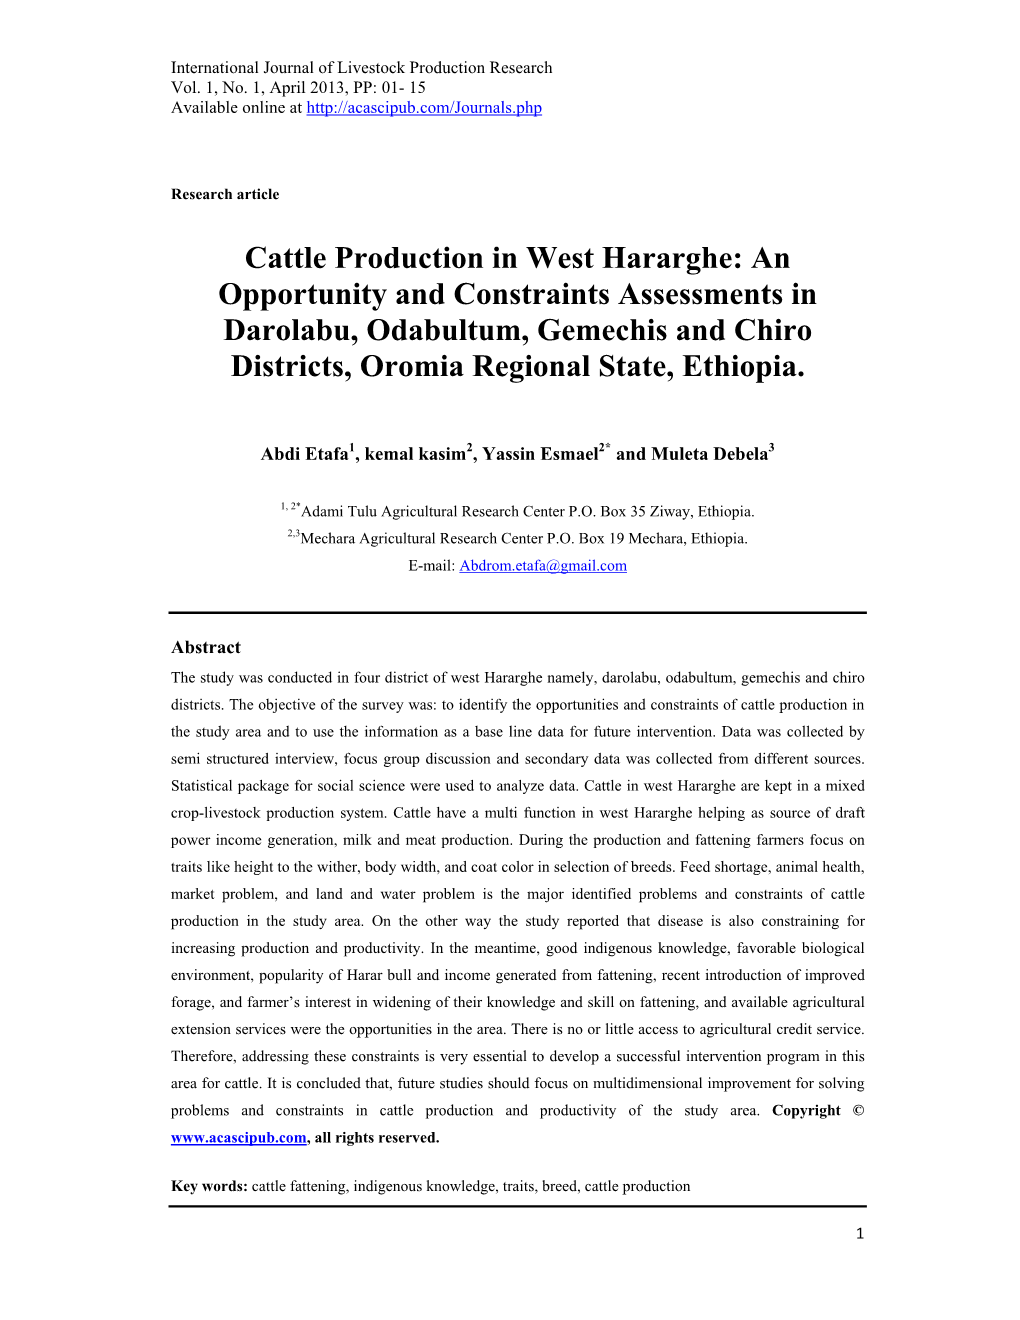 Cattle Production in West Hararghe: an Opportunity and Constraints Assessments in Darolabu, Odabultum, Gemechis and Chiro Districts, Oromia Regional State, Ethiopia